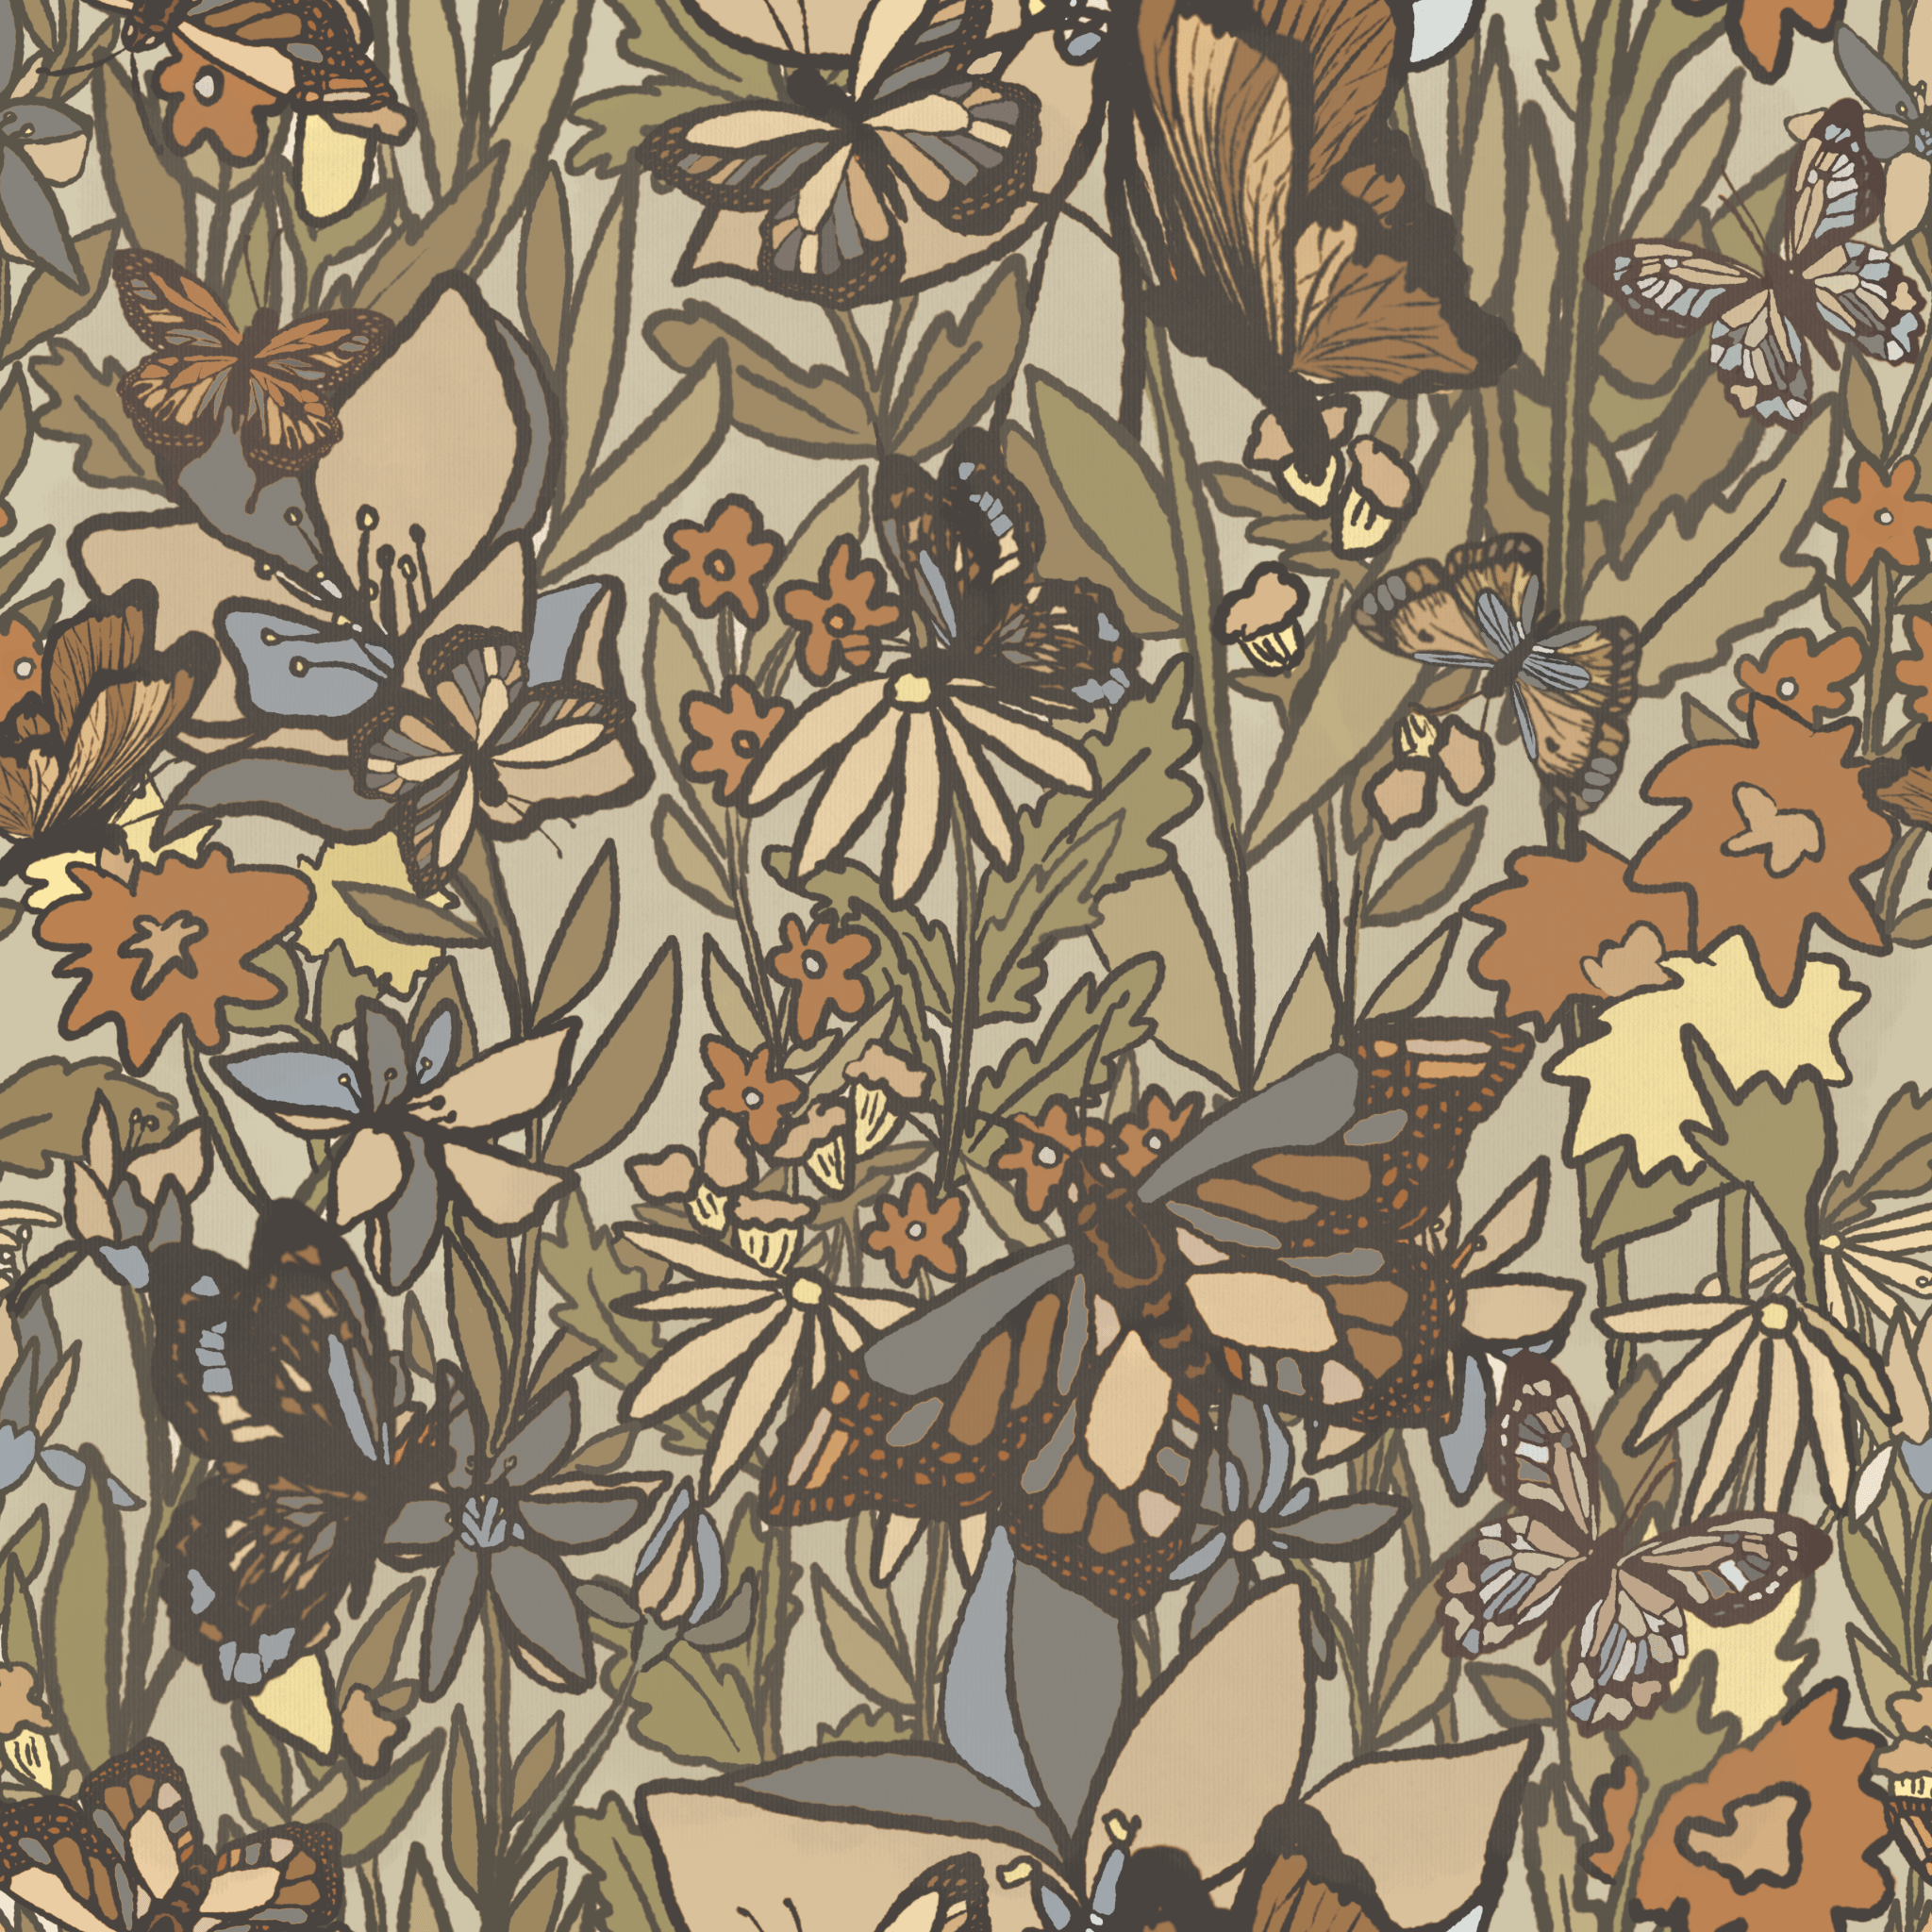 A detailed wallpaper design with various butterflies amidst floral patterns, showcasing a variety of species in a natural, muted color palette that brings a sense of calm and an outdoor feel indoors.